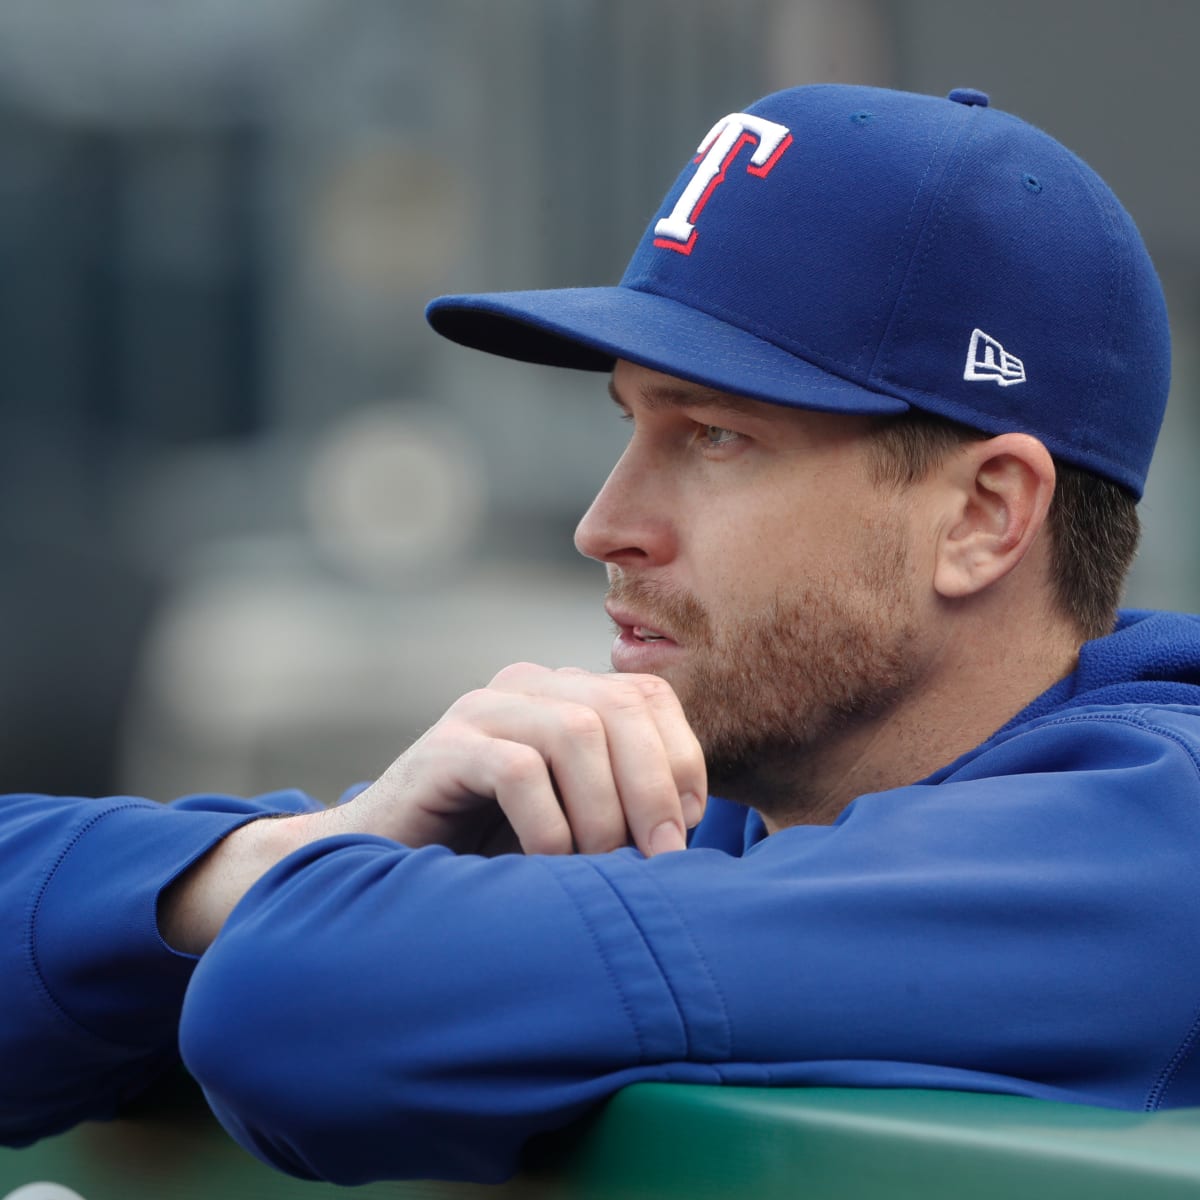 Rangers place ace Jacob deGrom on 60-day injured list, schedule MRI